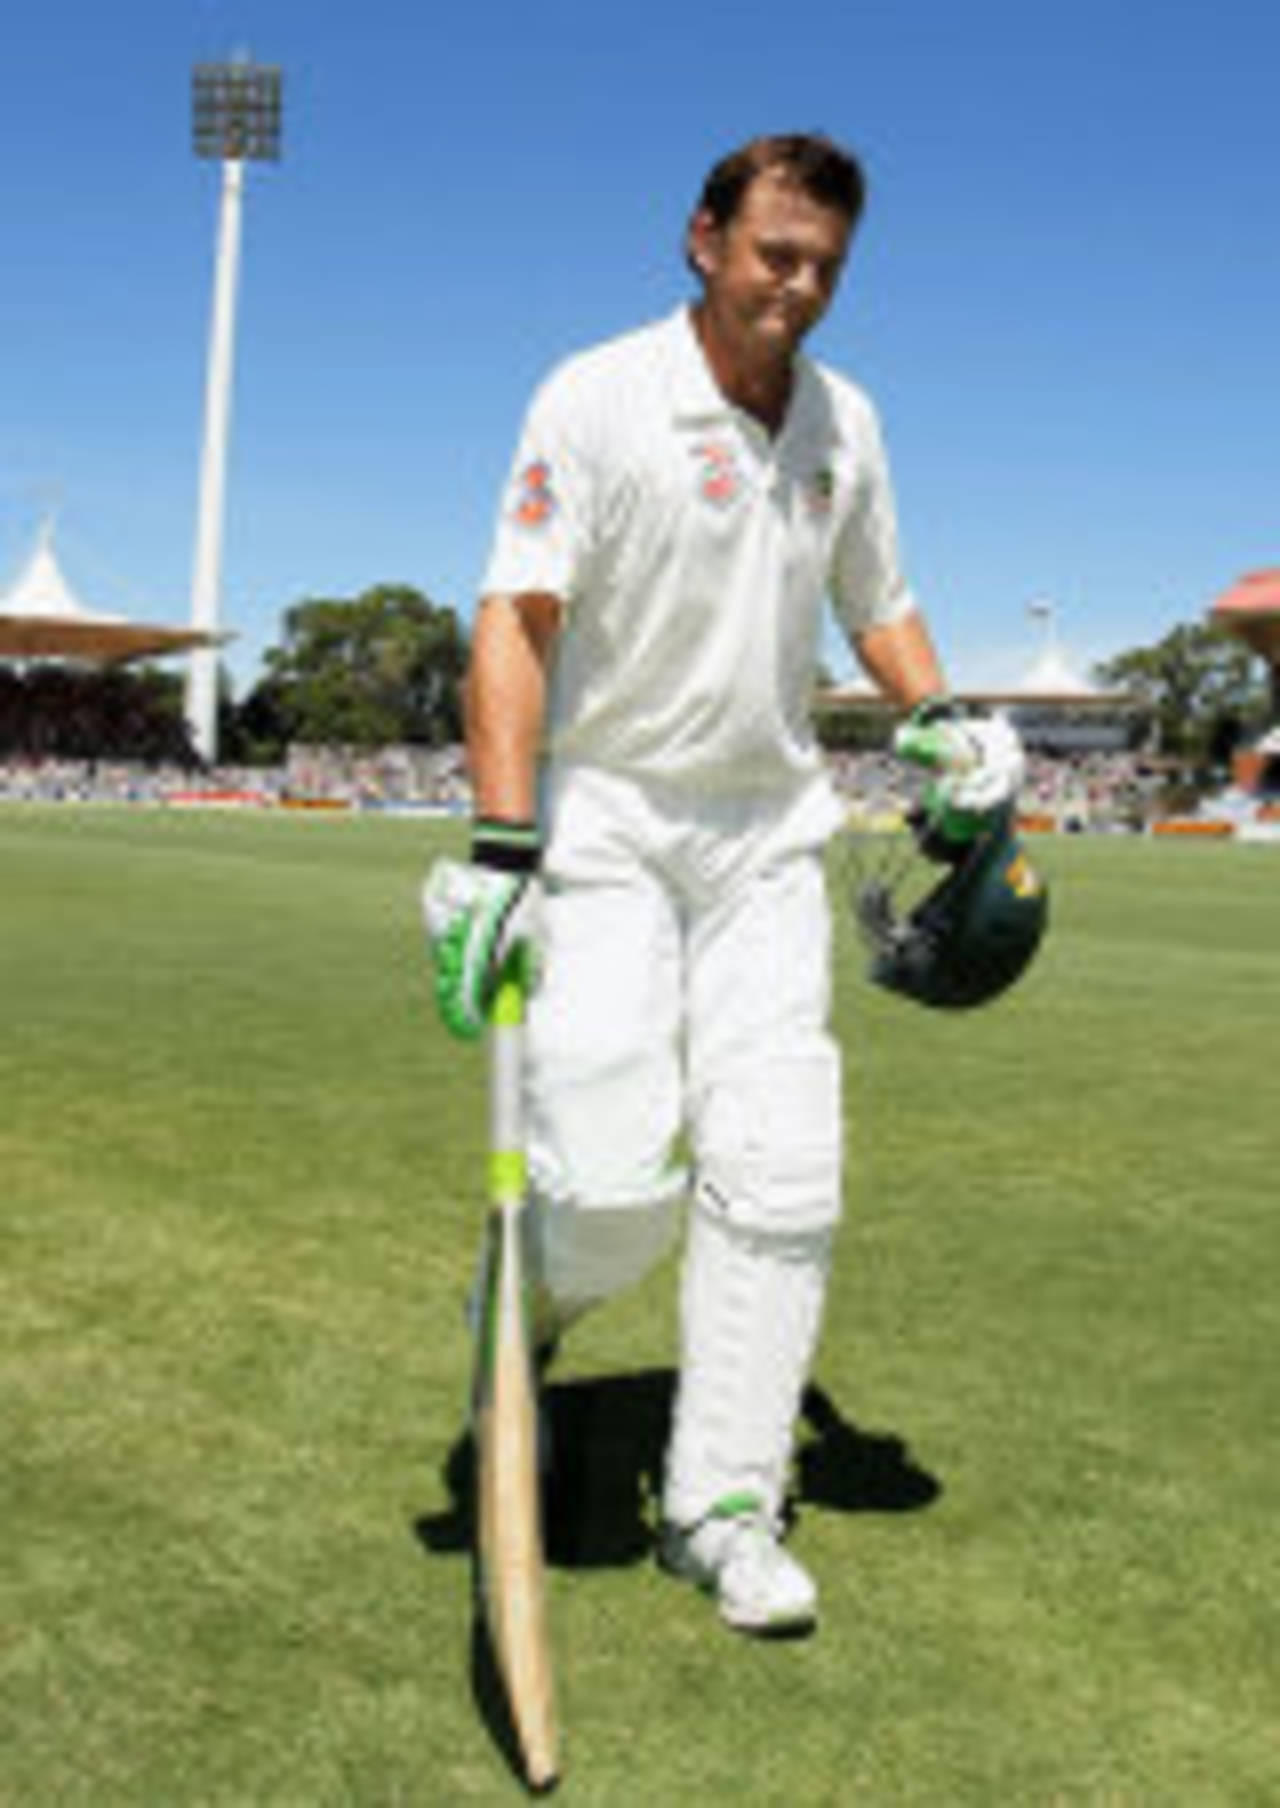 An emotional Adam Gilchrist departs the field, Australia v India, 4th Test, Adelaide, 4th day, January 27, 2008